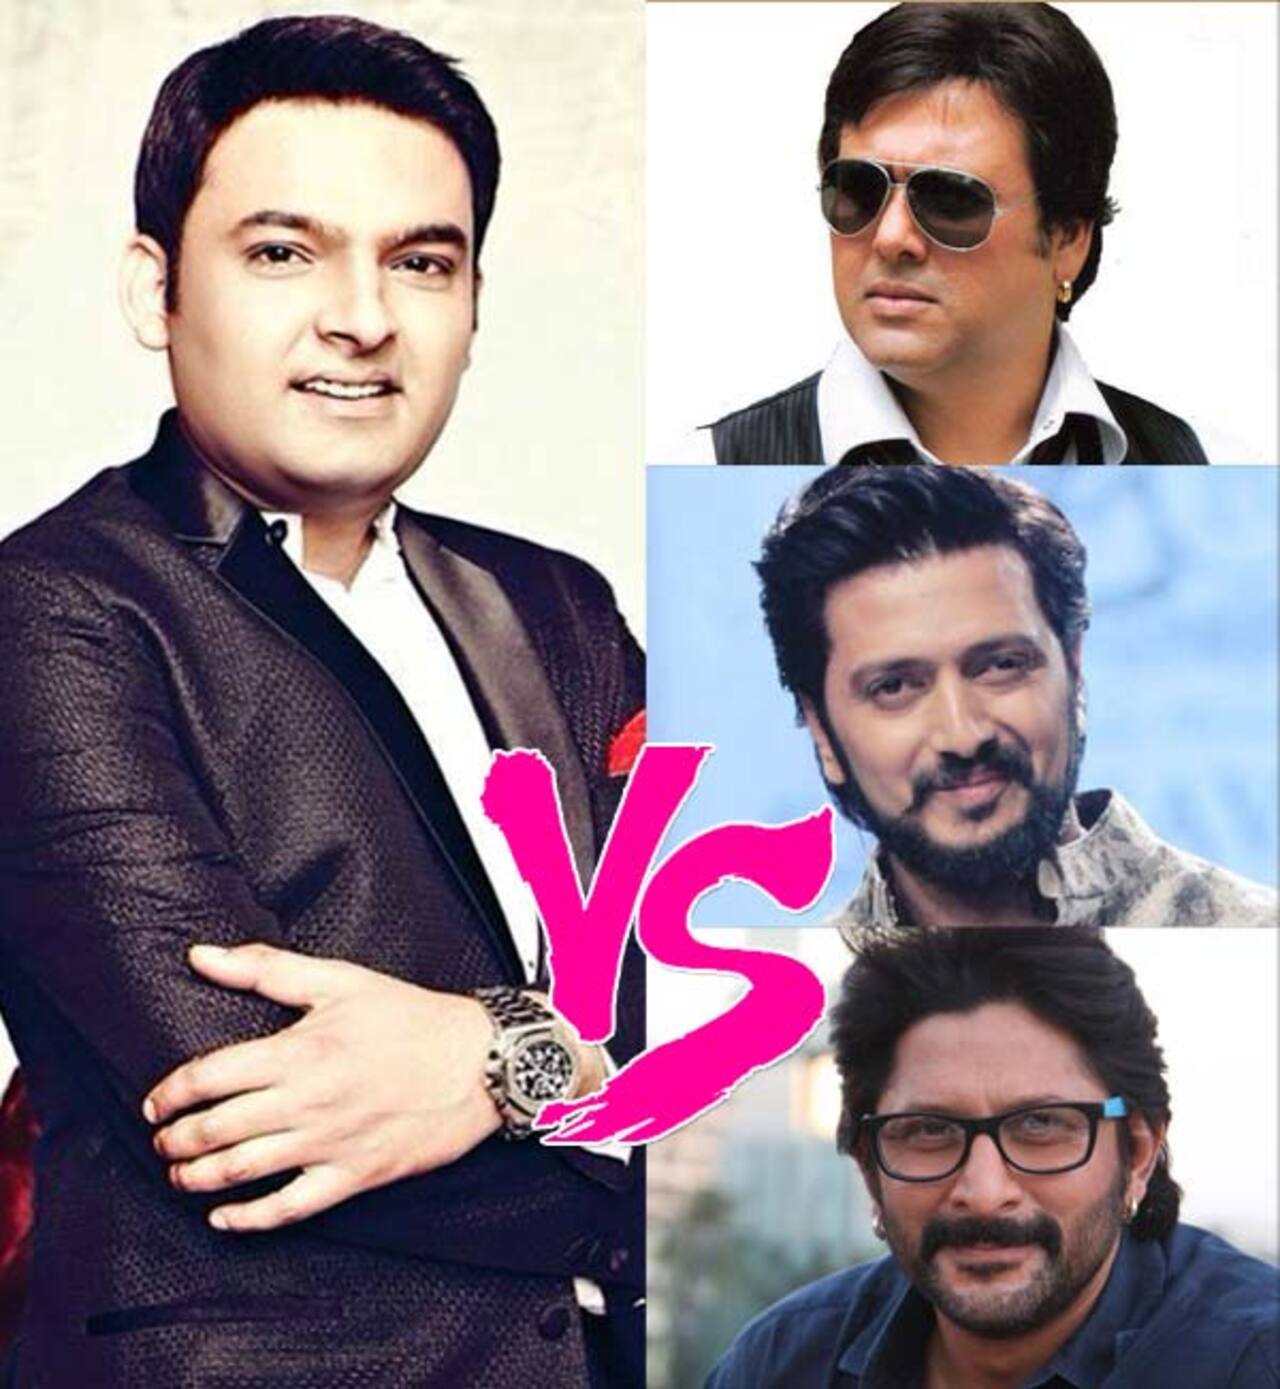 Riteish Deshmukh, Tusshar Kapoor, Arshad Warsi, watch out! Kapil Sharma is gonna invade your territory!